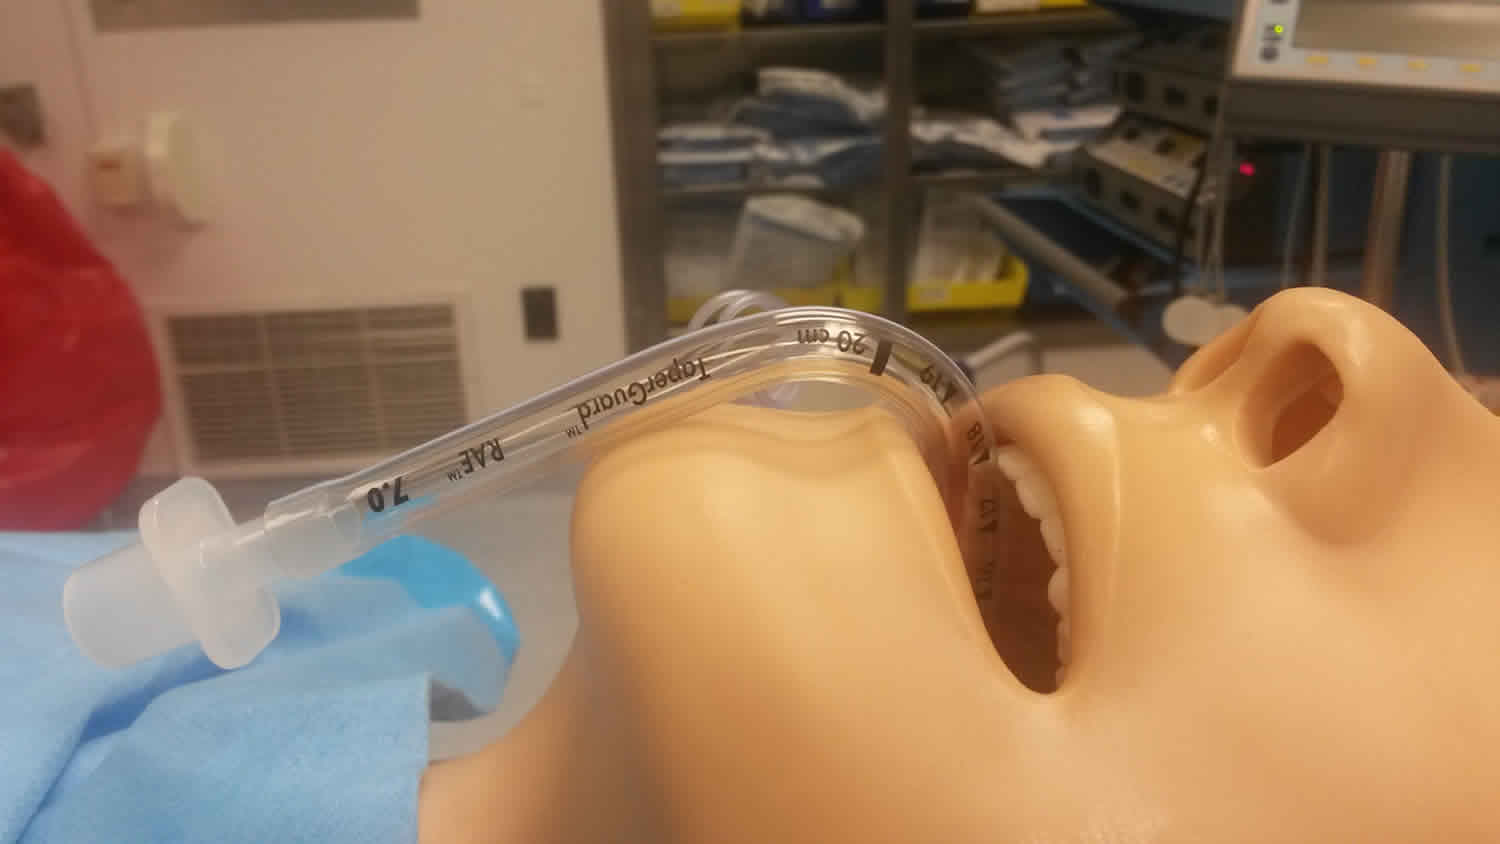 Oral endotracheal tube in position